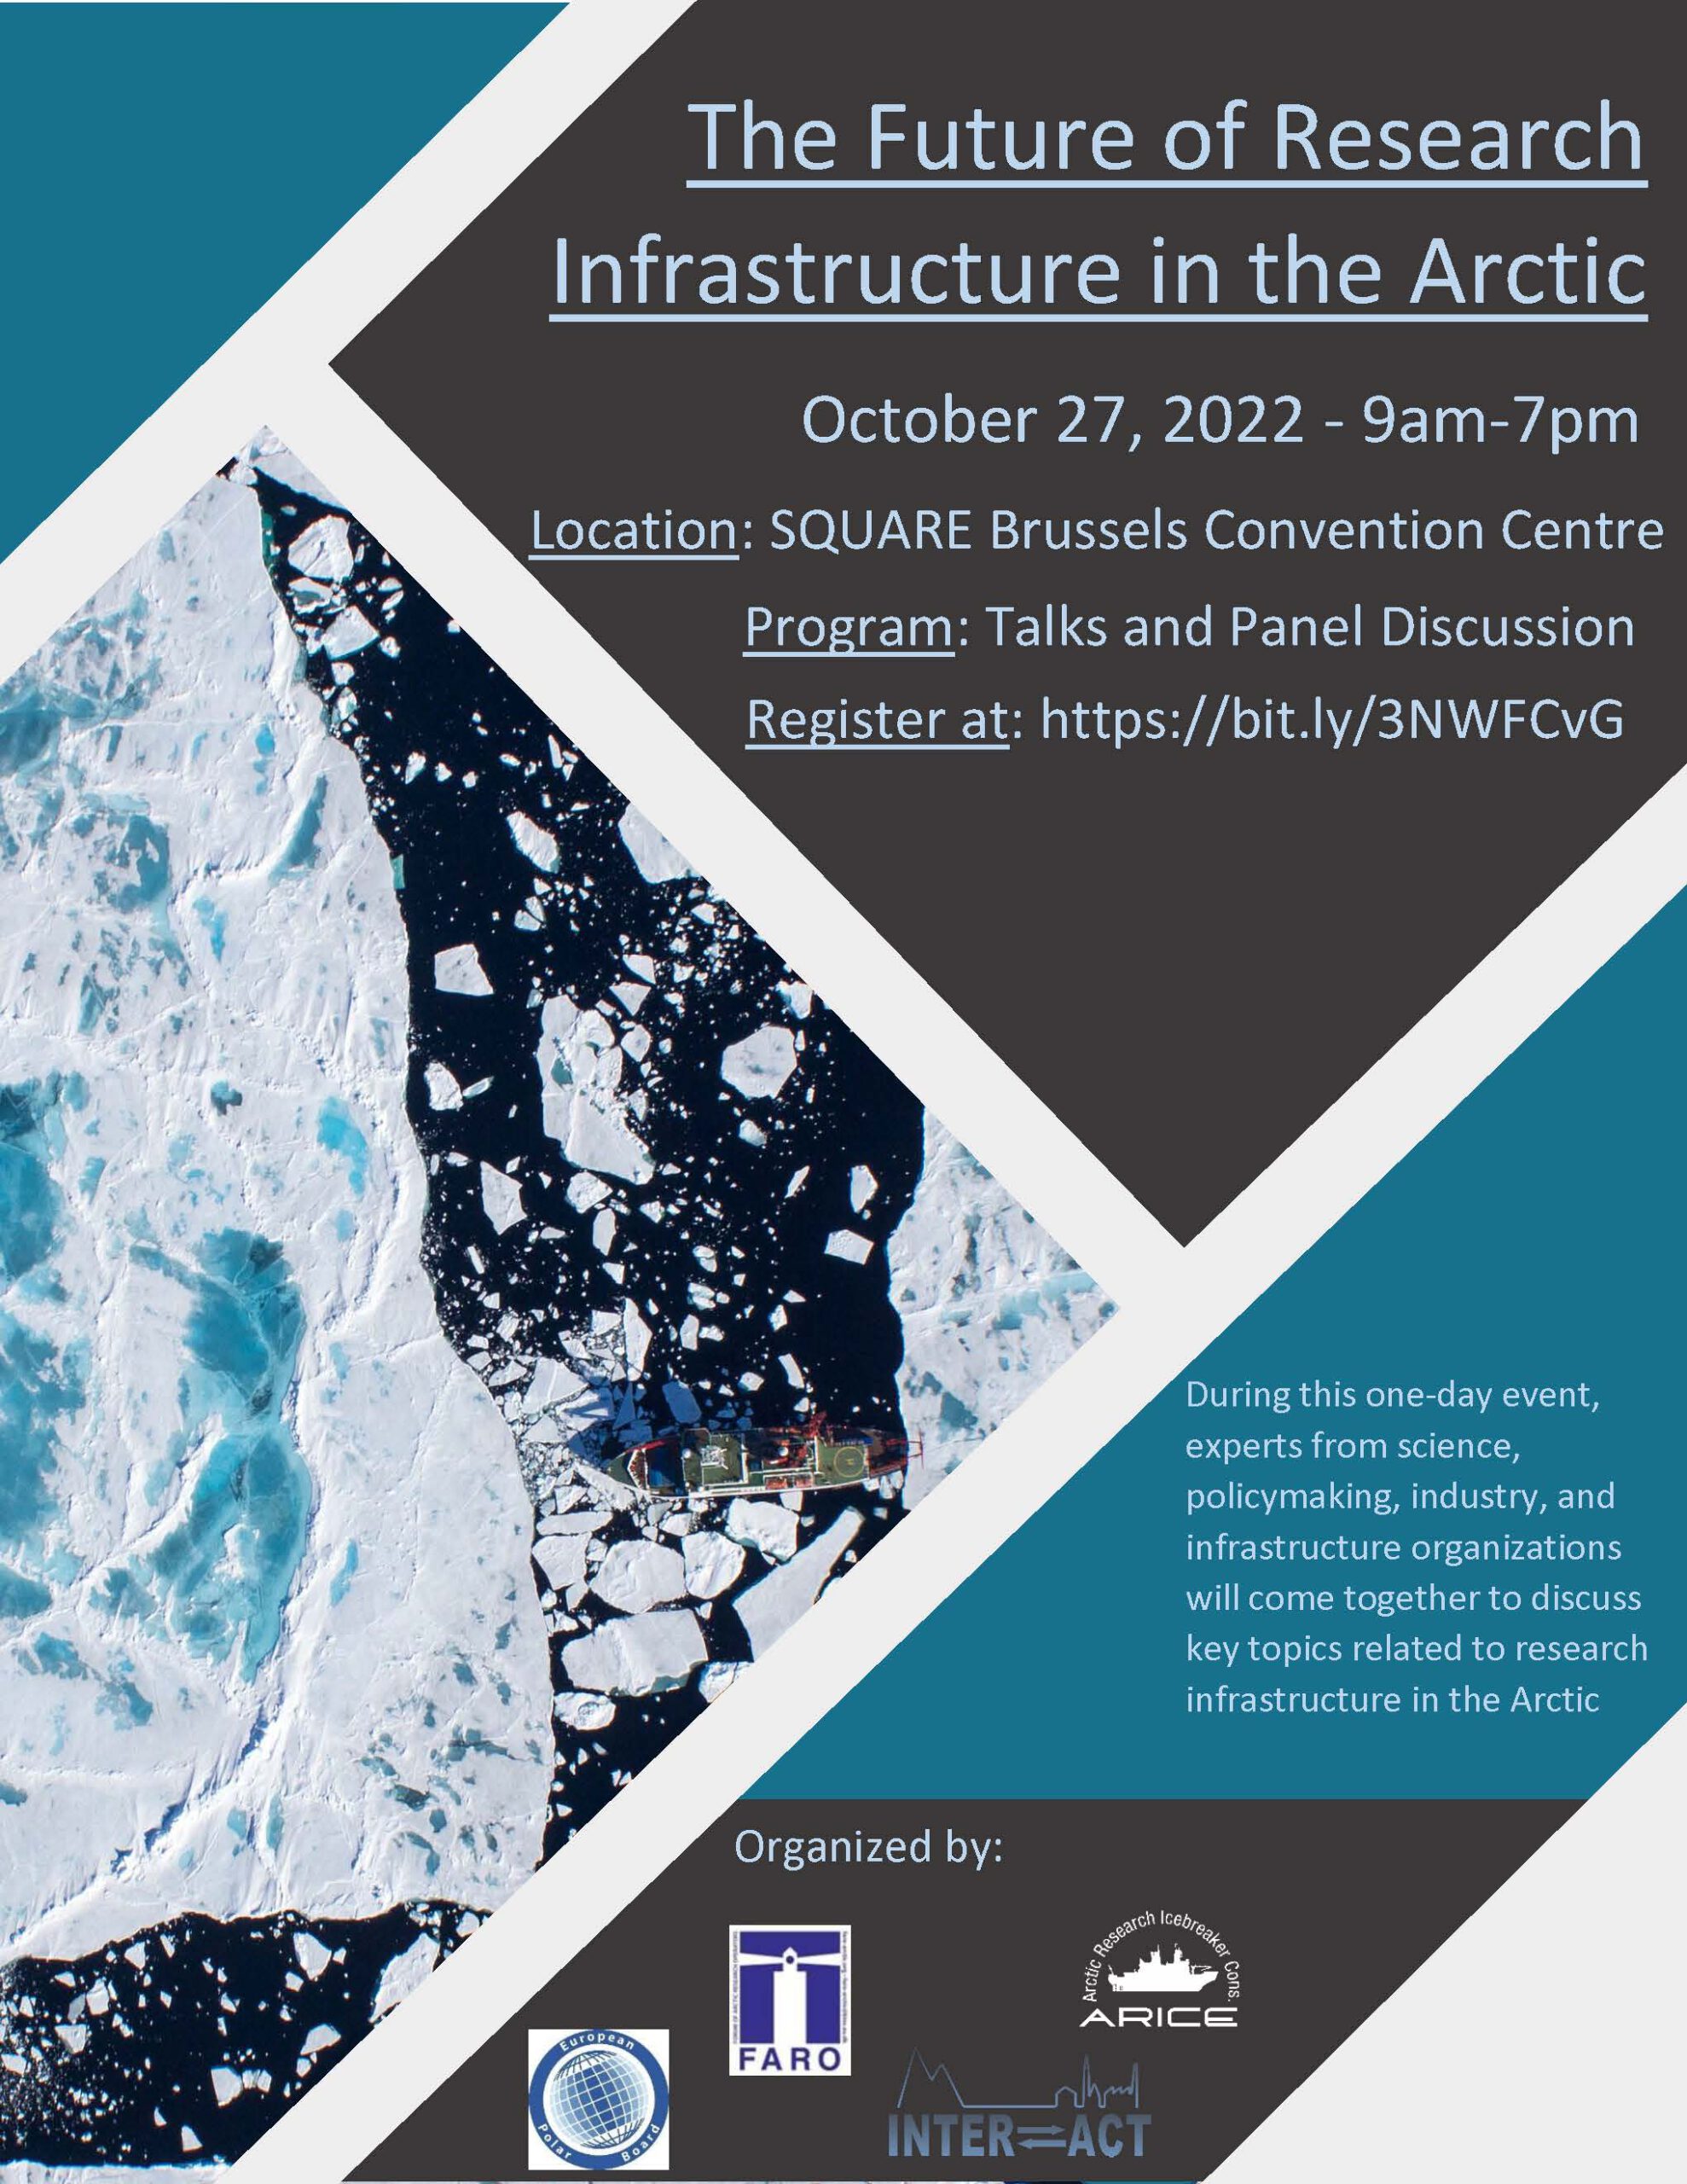 The Future of Research Infrastructure in the Arctic_flyer_page1 (1)